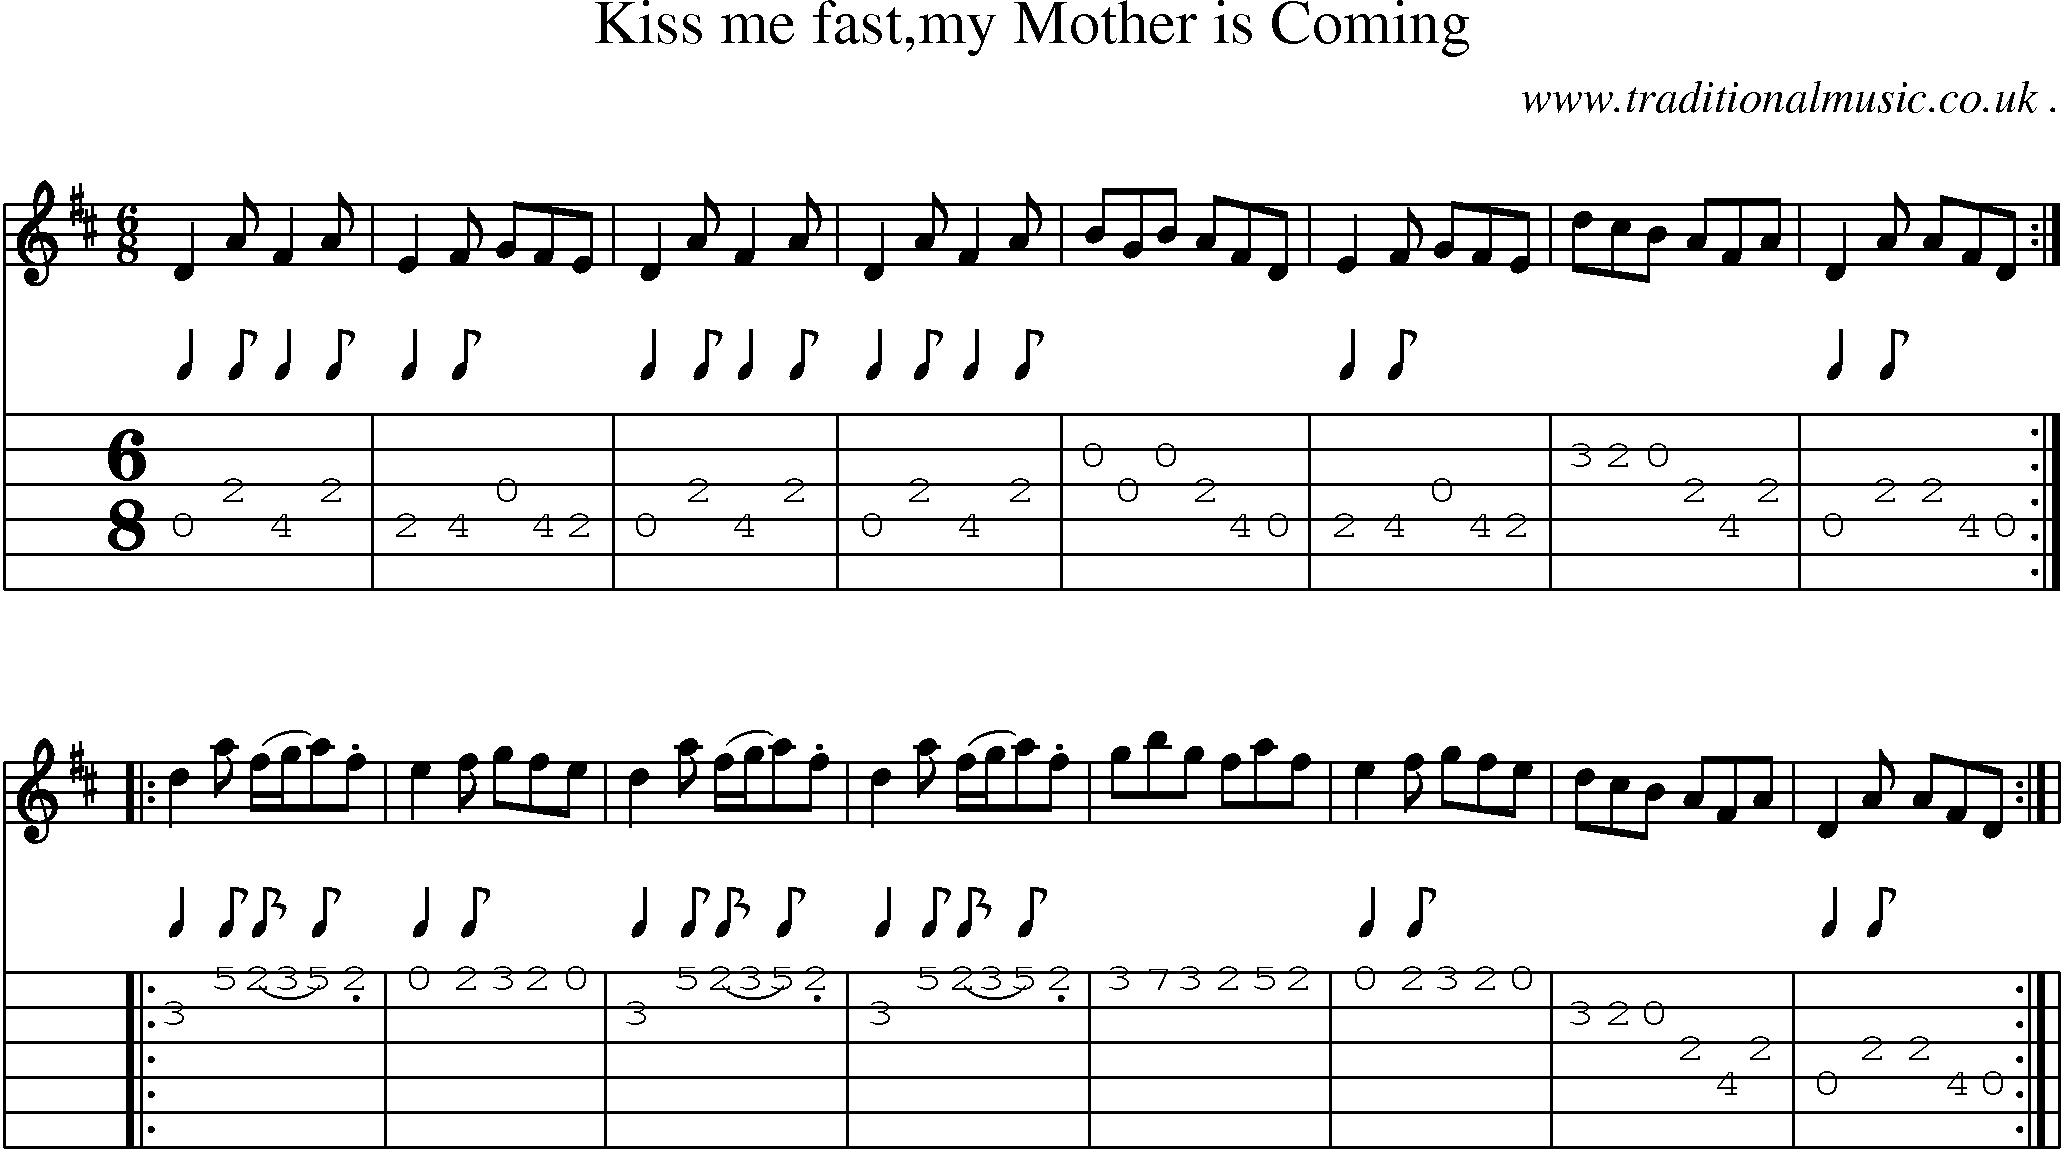 Sheet-Music and Guitar Tabs for Kiss Me Fastmy Mother Is Coming